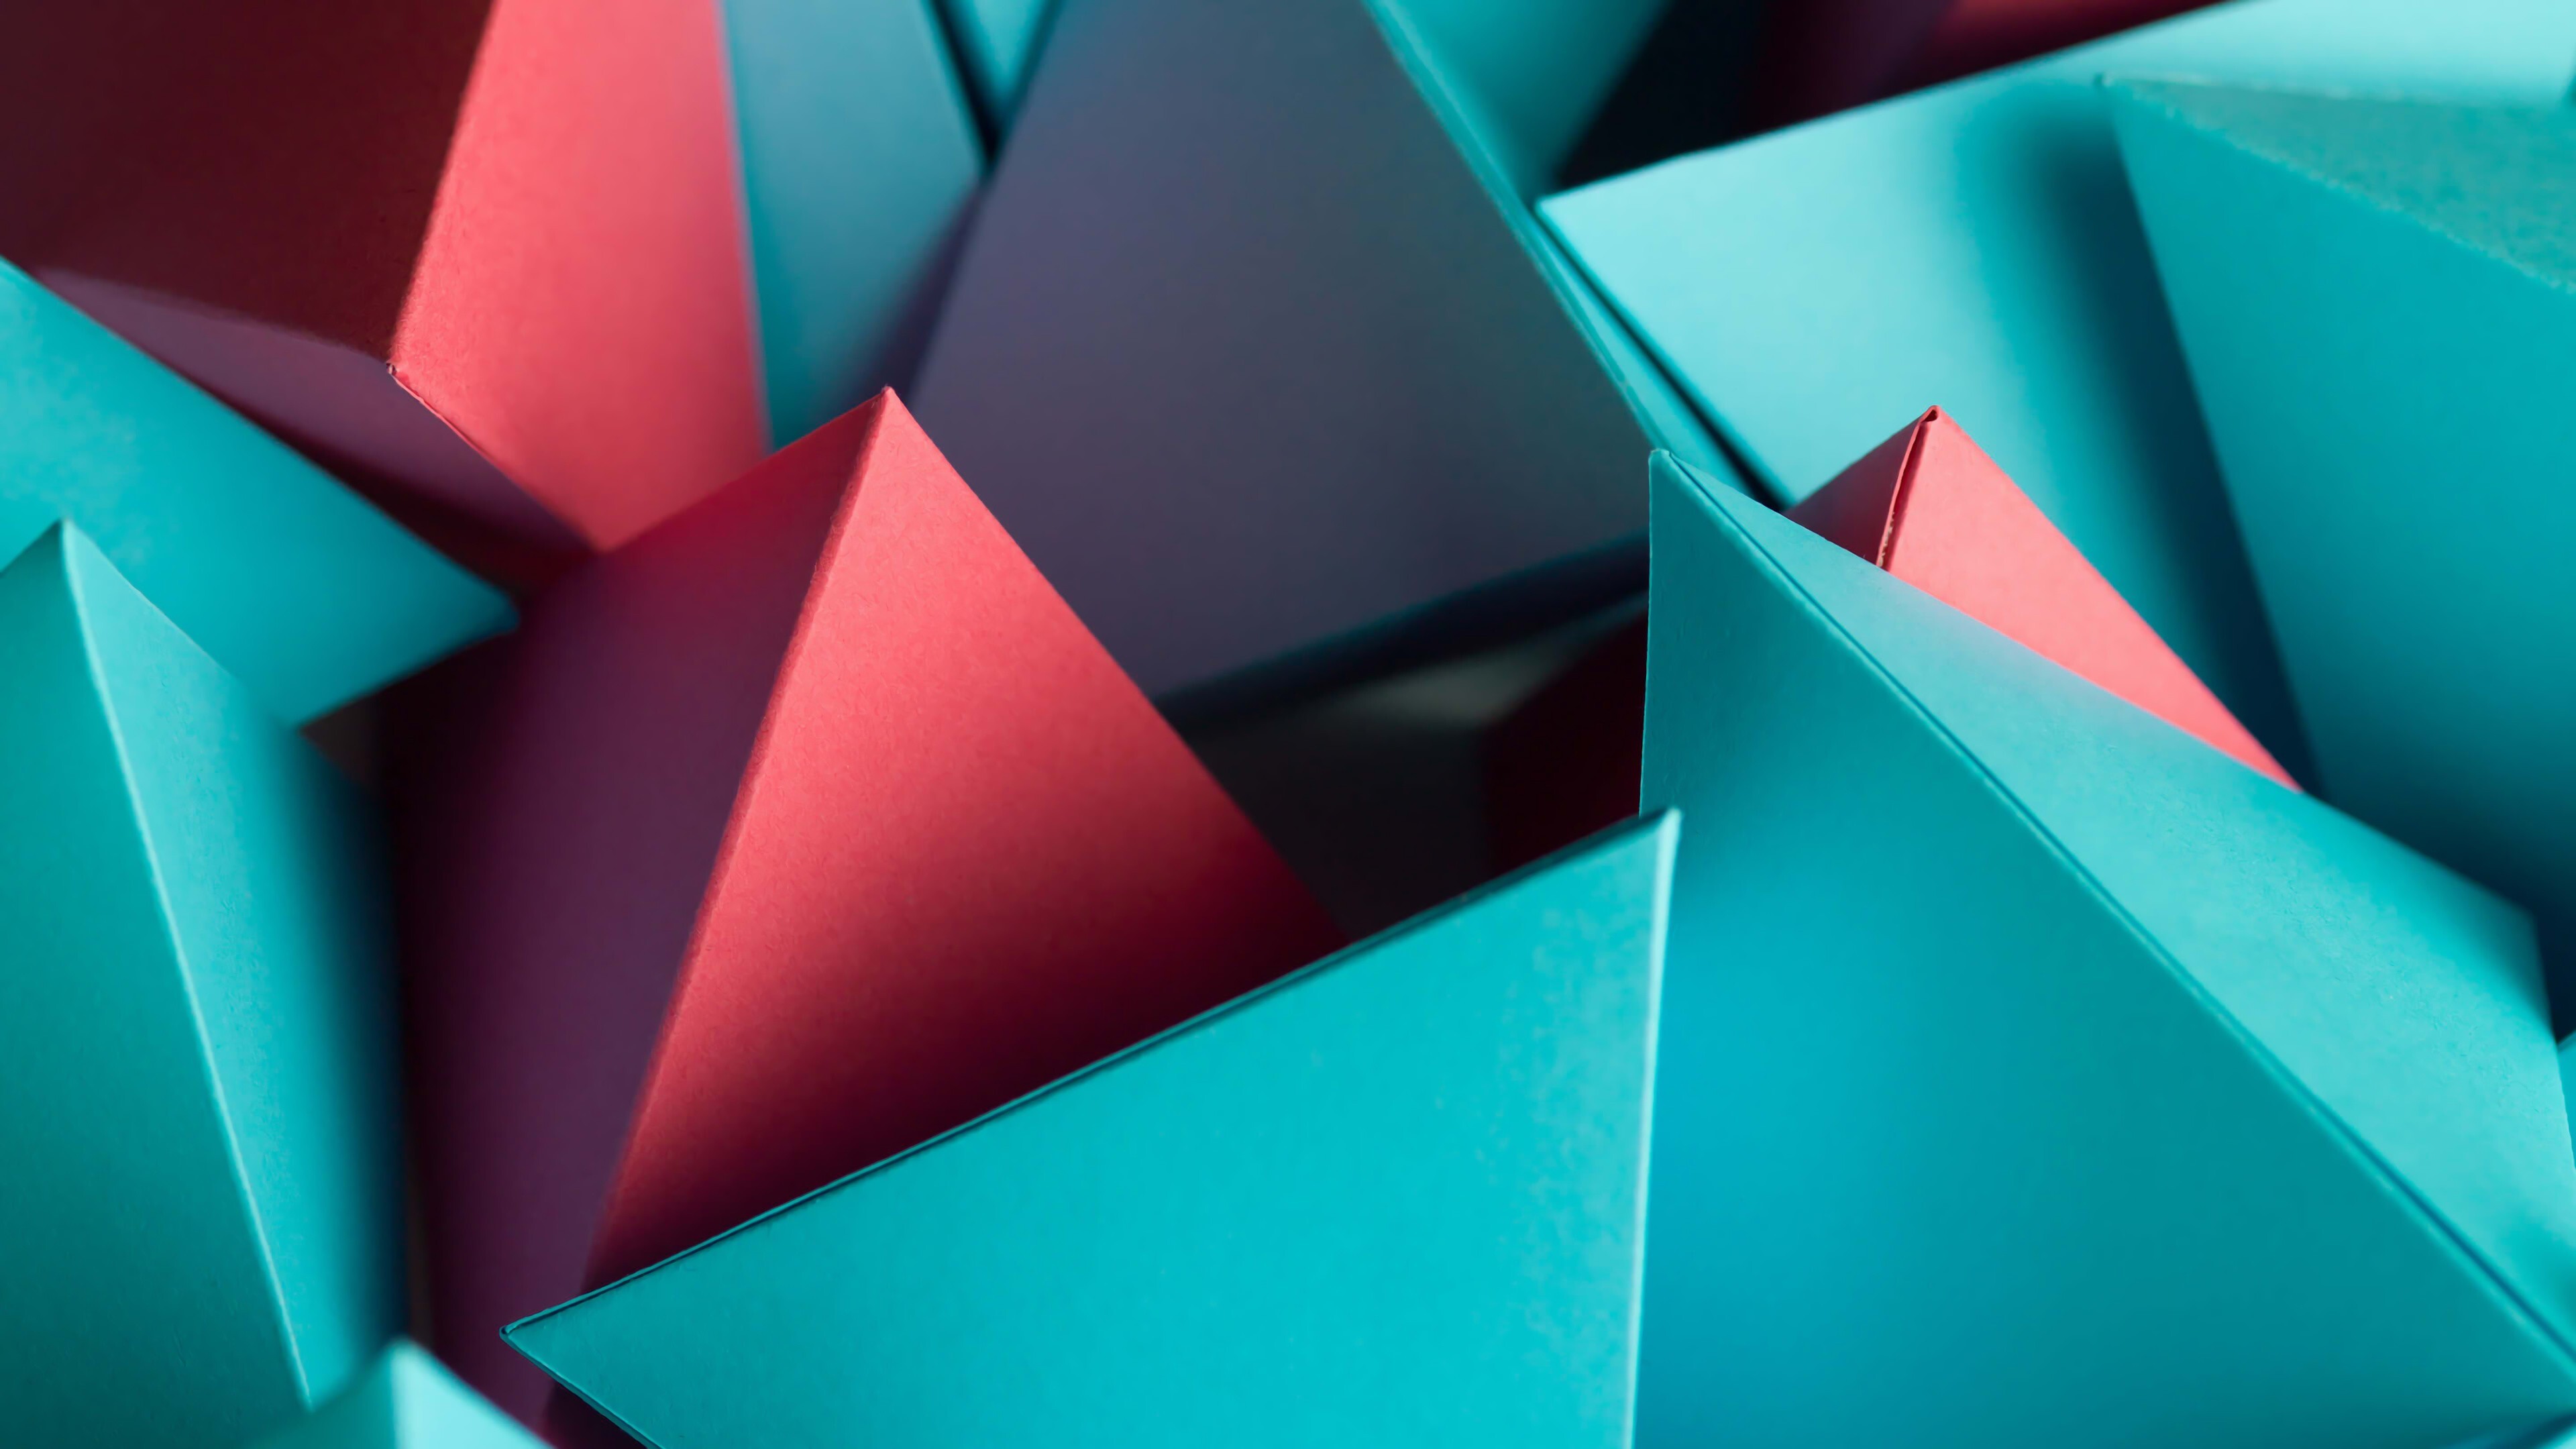 Triangle: Polyhedrons, Abstract, Three-dimensional shapes, Pyramids. 3840x2160 4K Wallpaper.